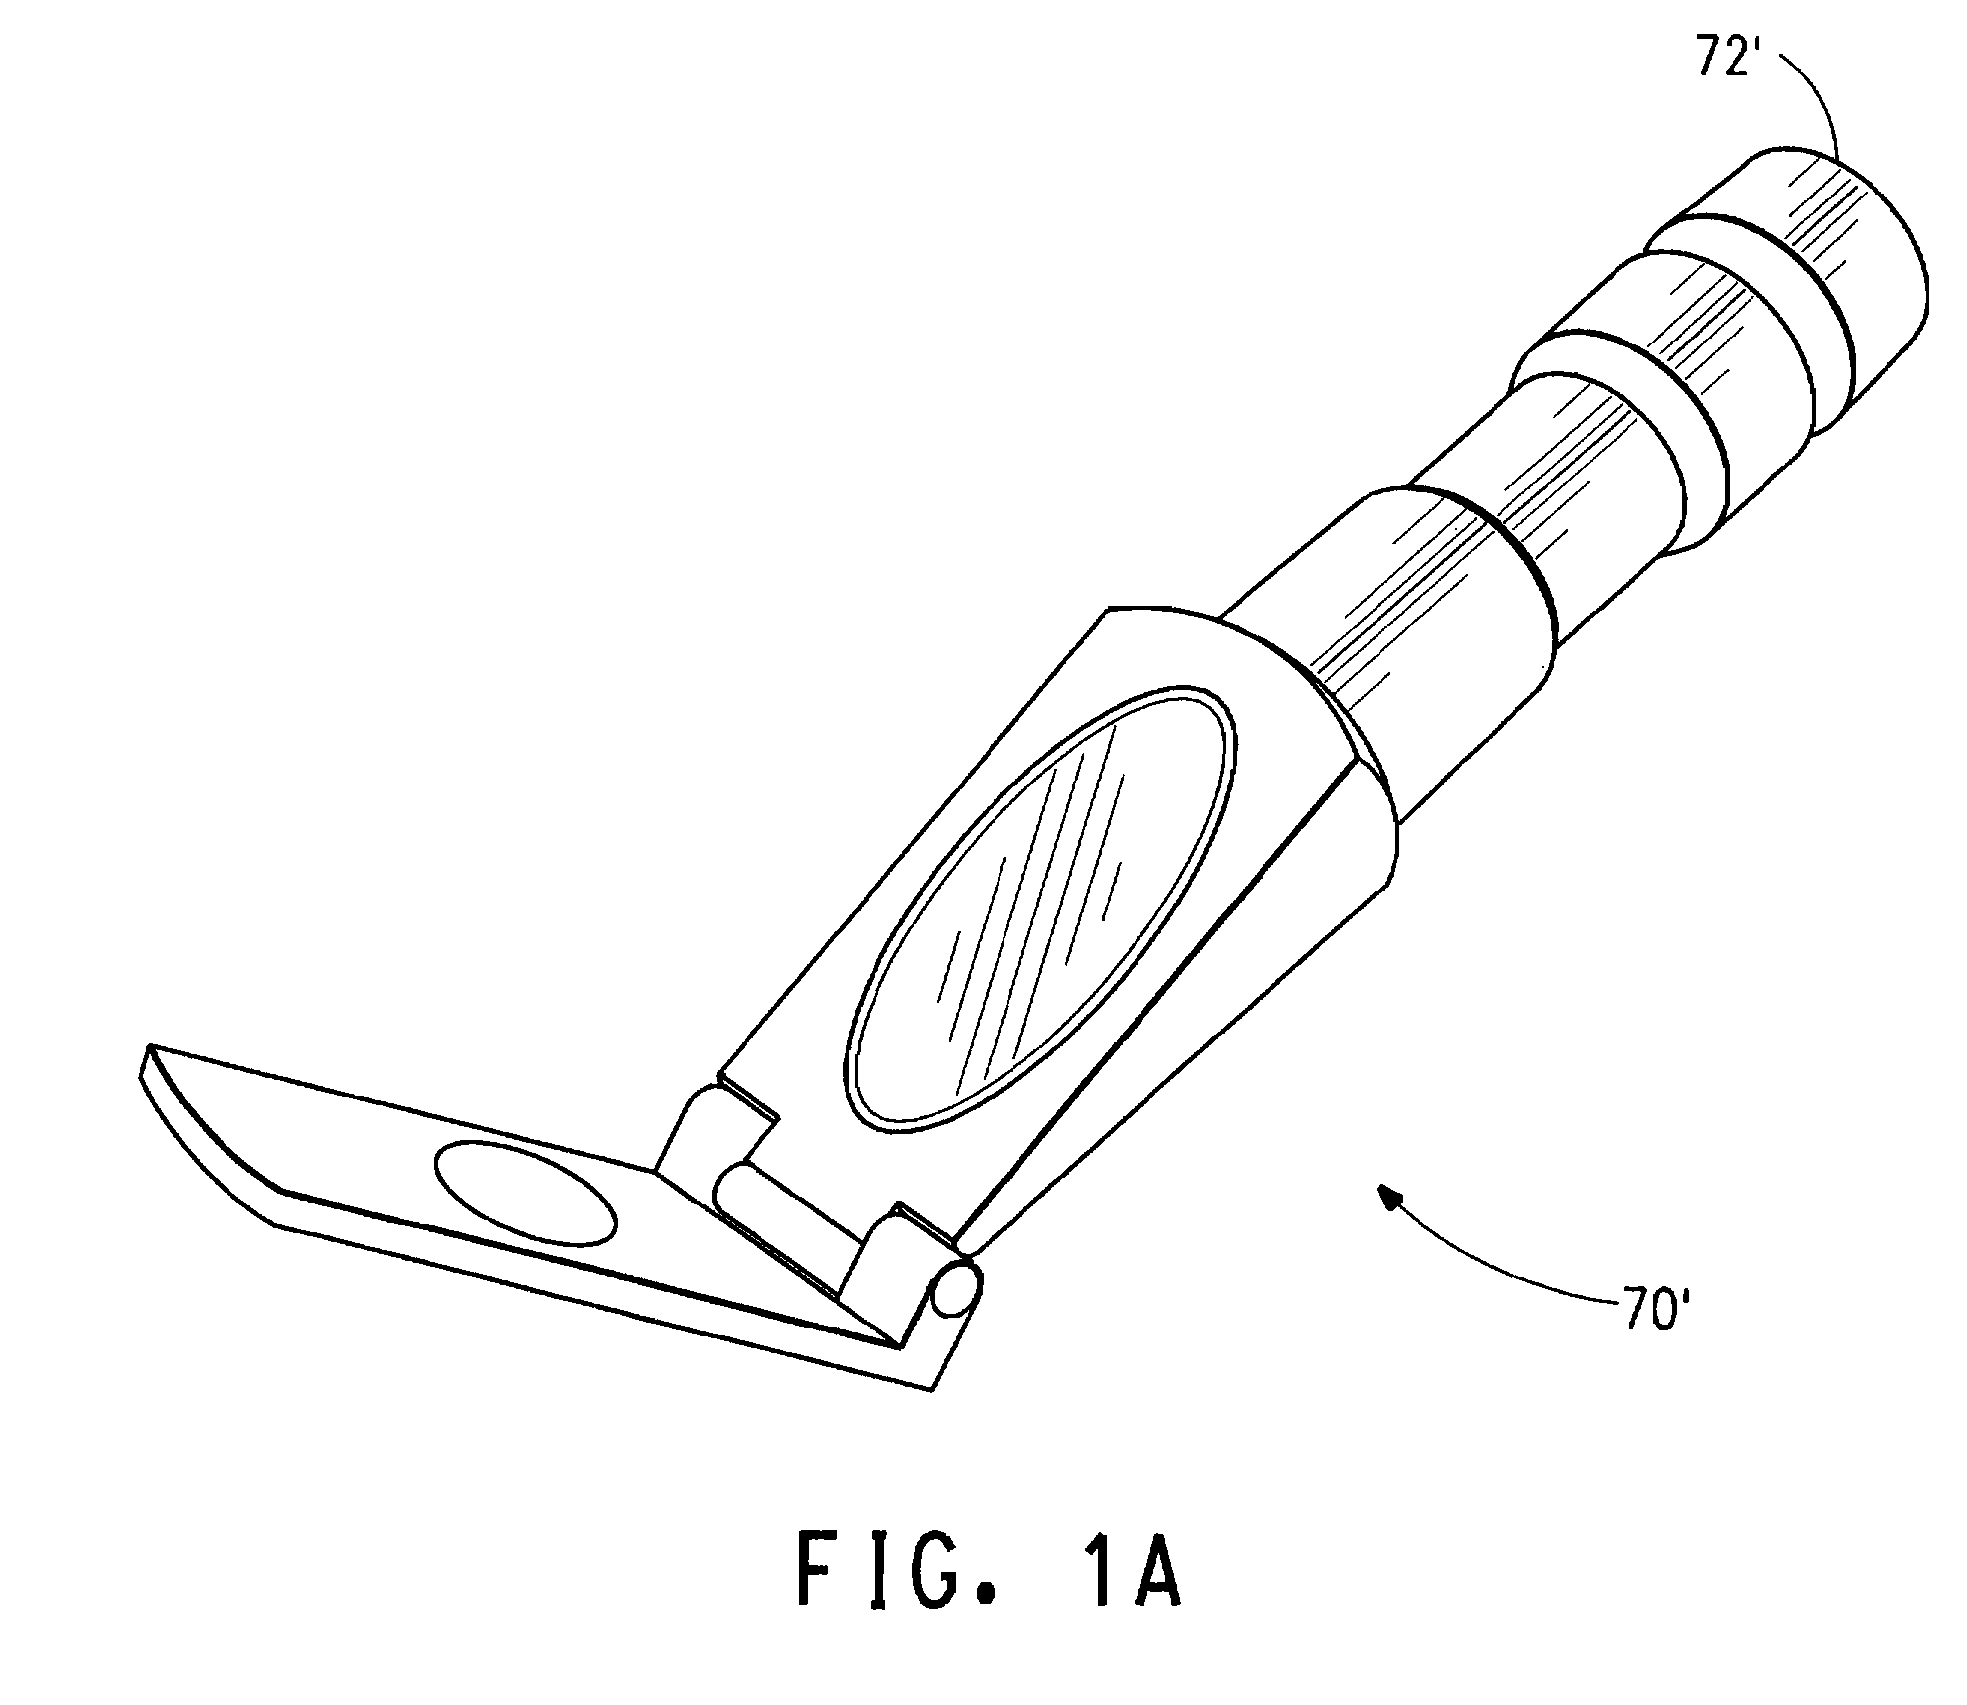 Method of determining the components of a fluoroolefin composition, method of recharging a fluid system in response thereto, and sensors used therefor